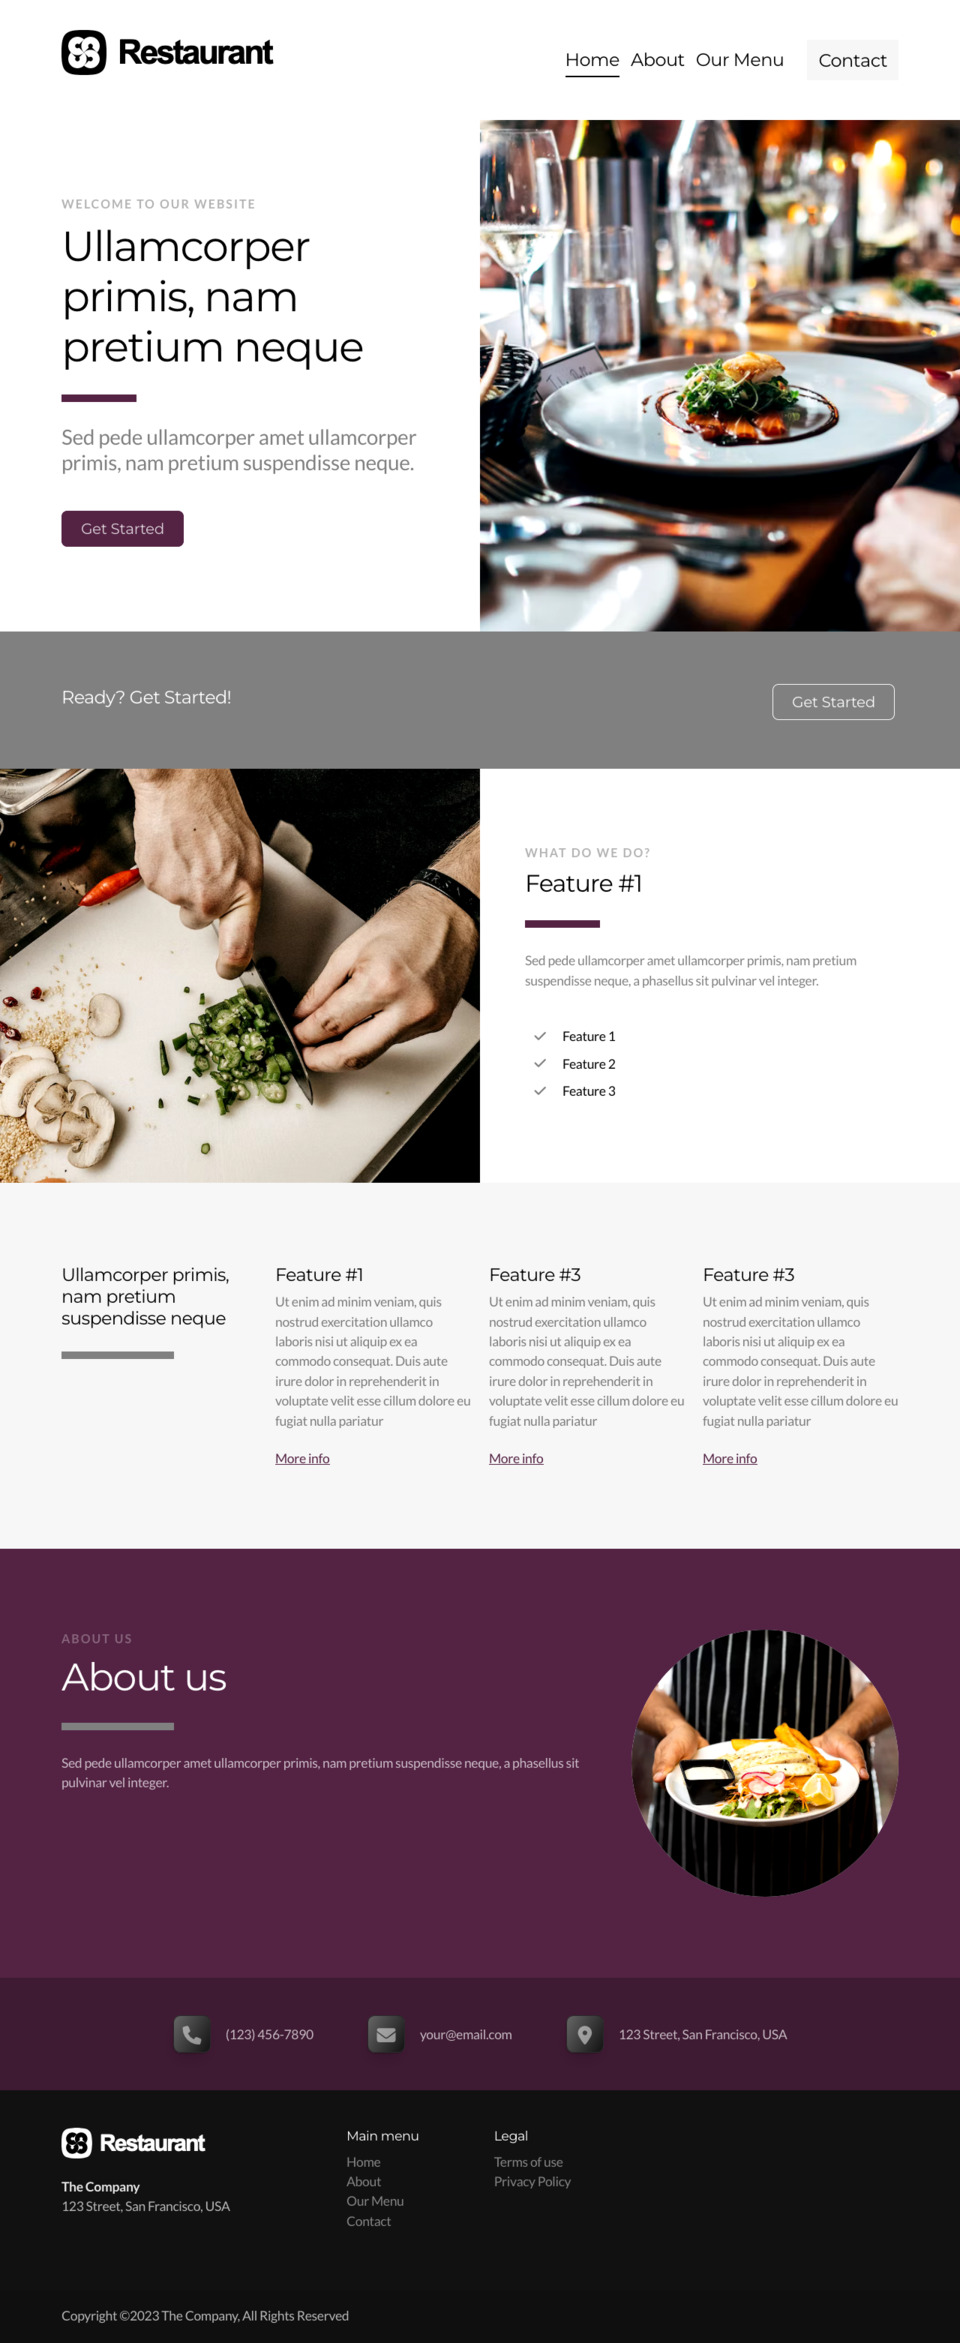 Restaurant Website Template - Ideal for restaurant owners, food bloggers, catering services, local diners, and anyone looking to showcase their culinary offerings online.